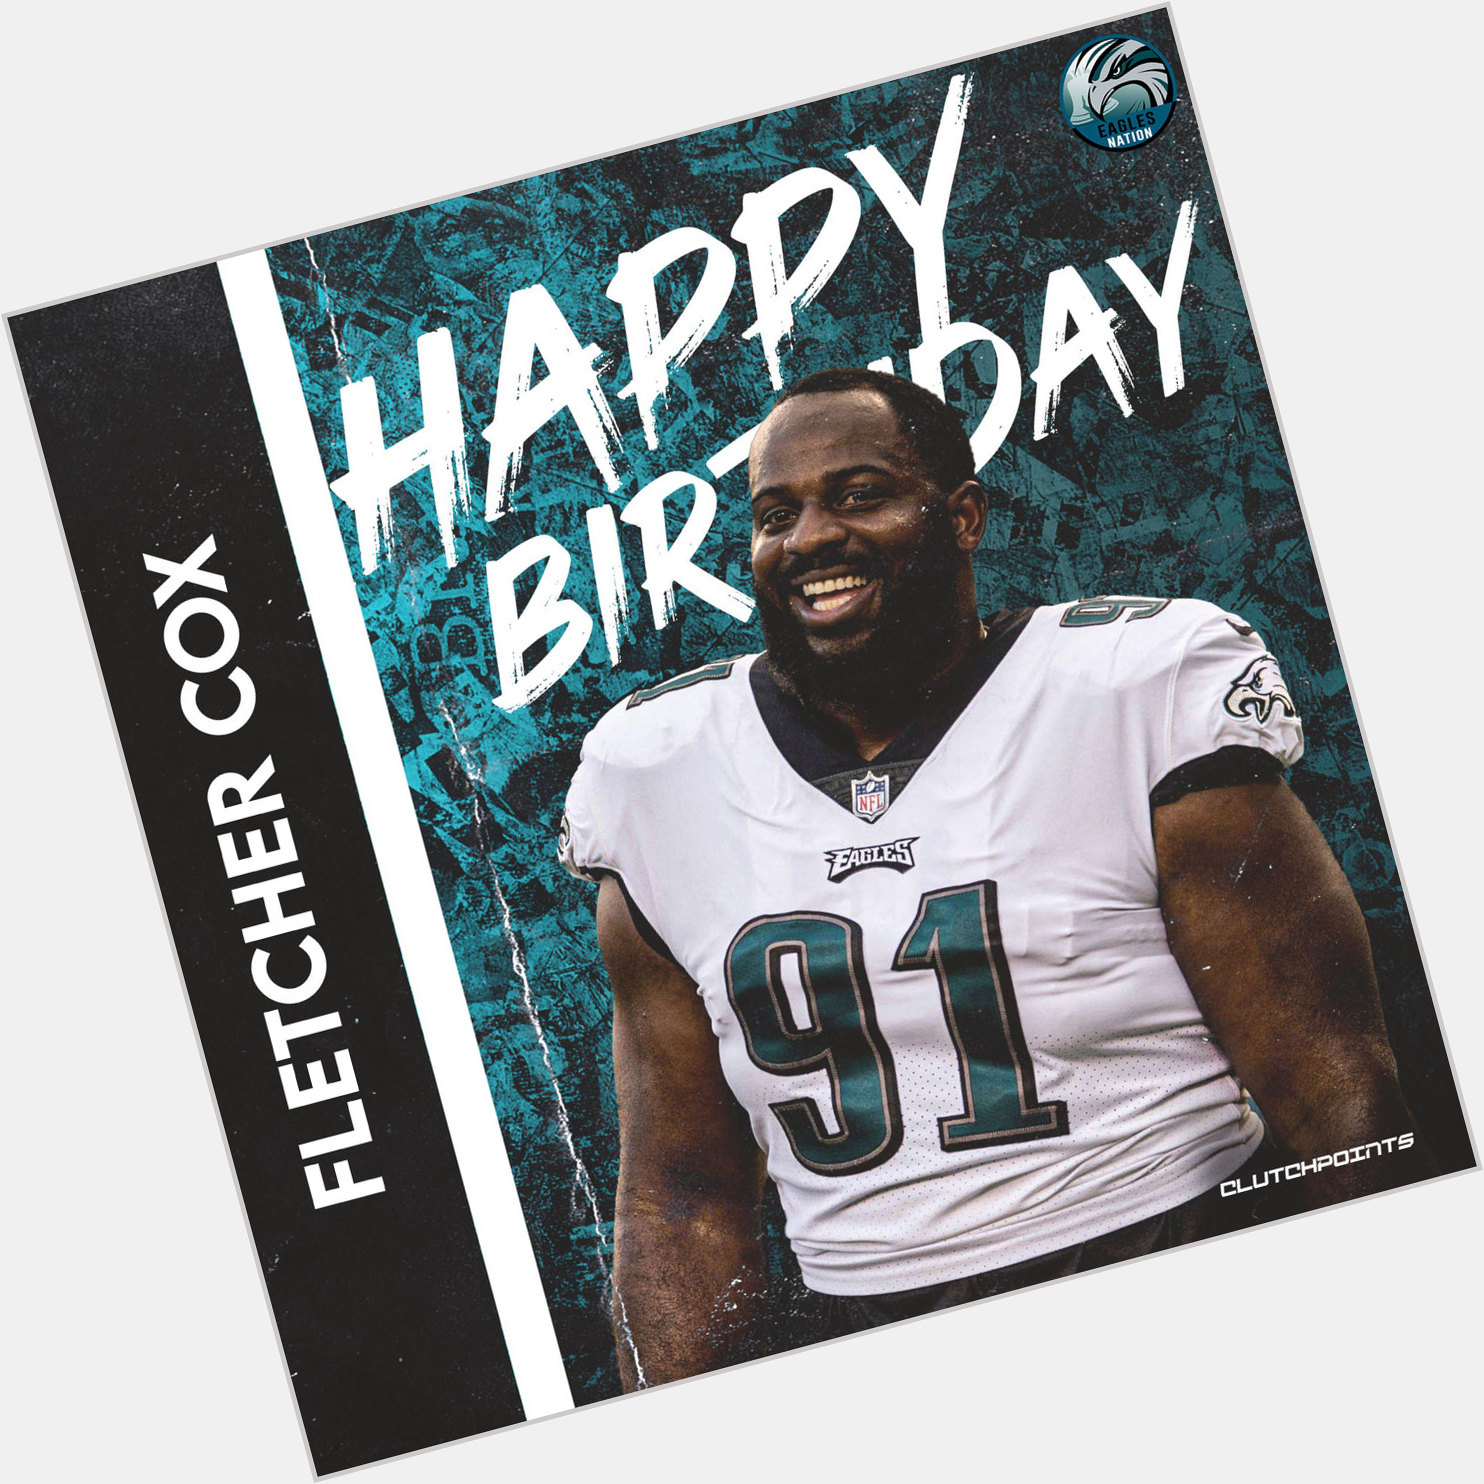 Eagles Nation, join us in wishing Fletcher Cox a happy 32nd birthday 